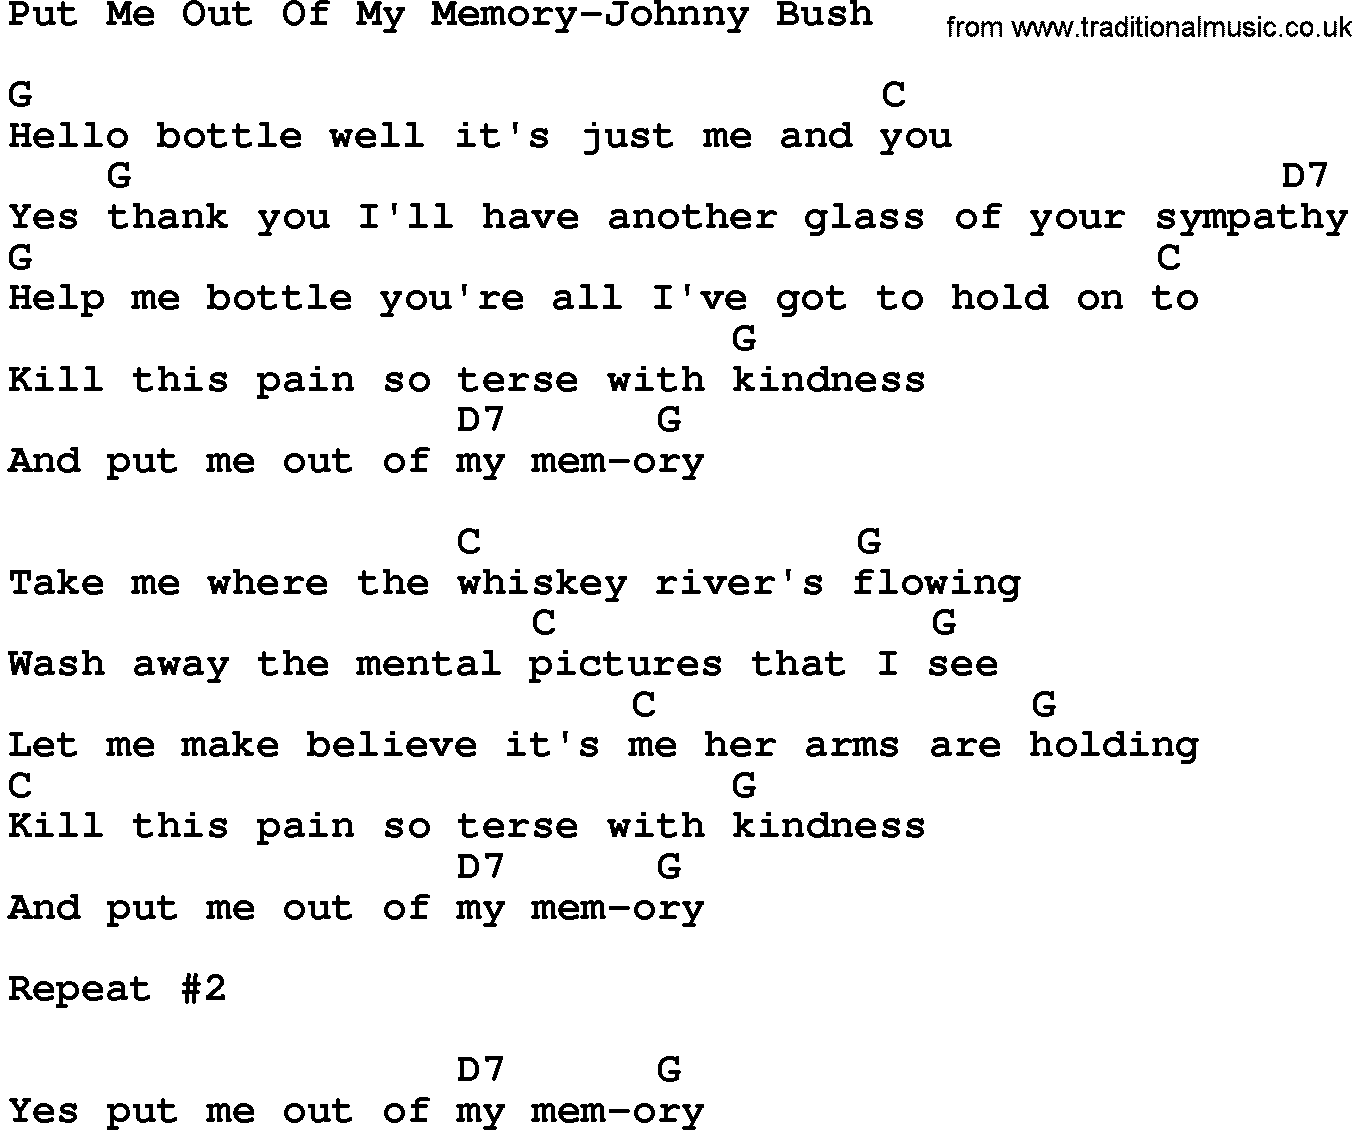 Country music song: Put Me Out Of My Memory-Johnny Bush lyrics and chords